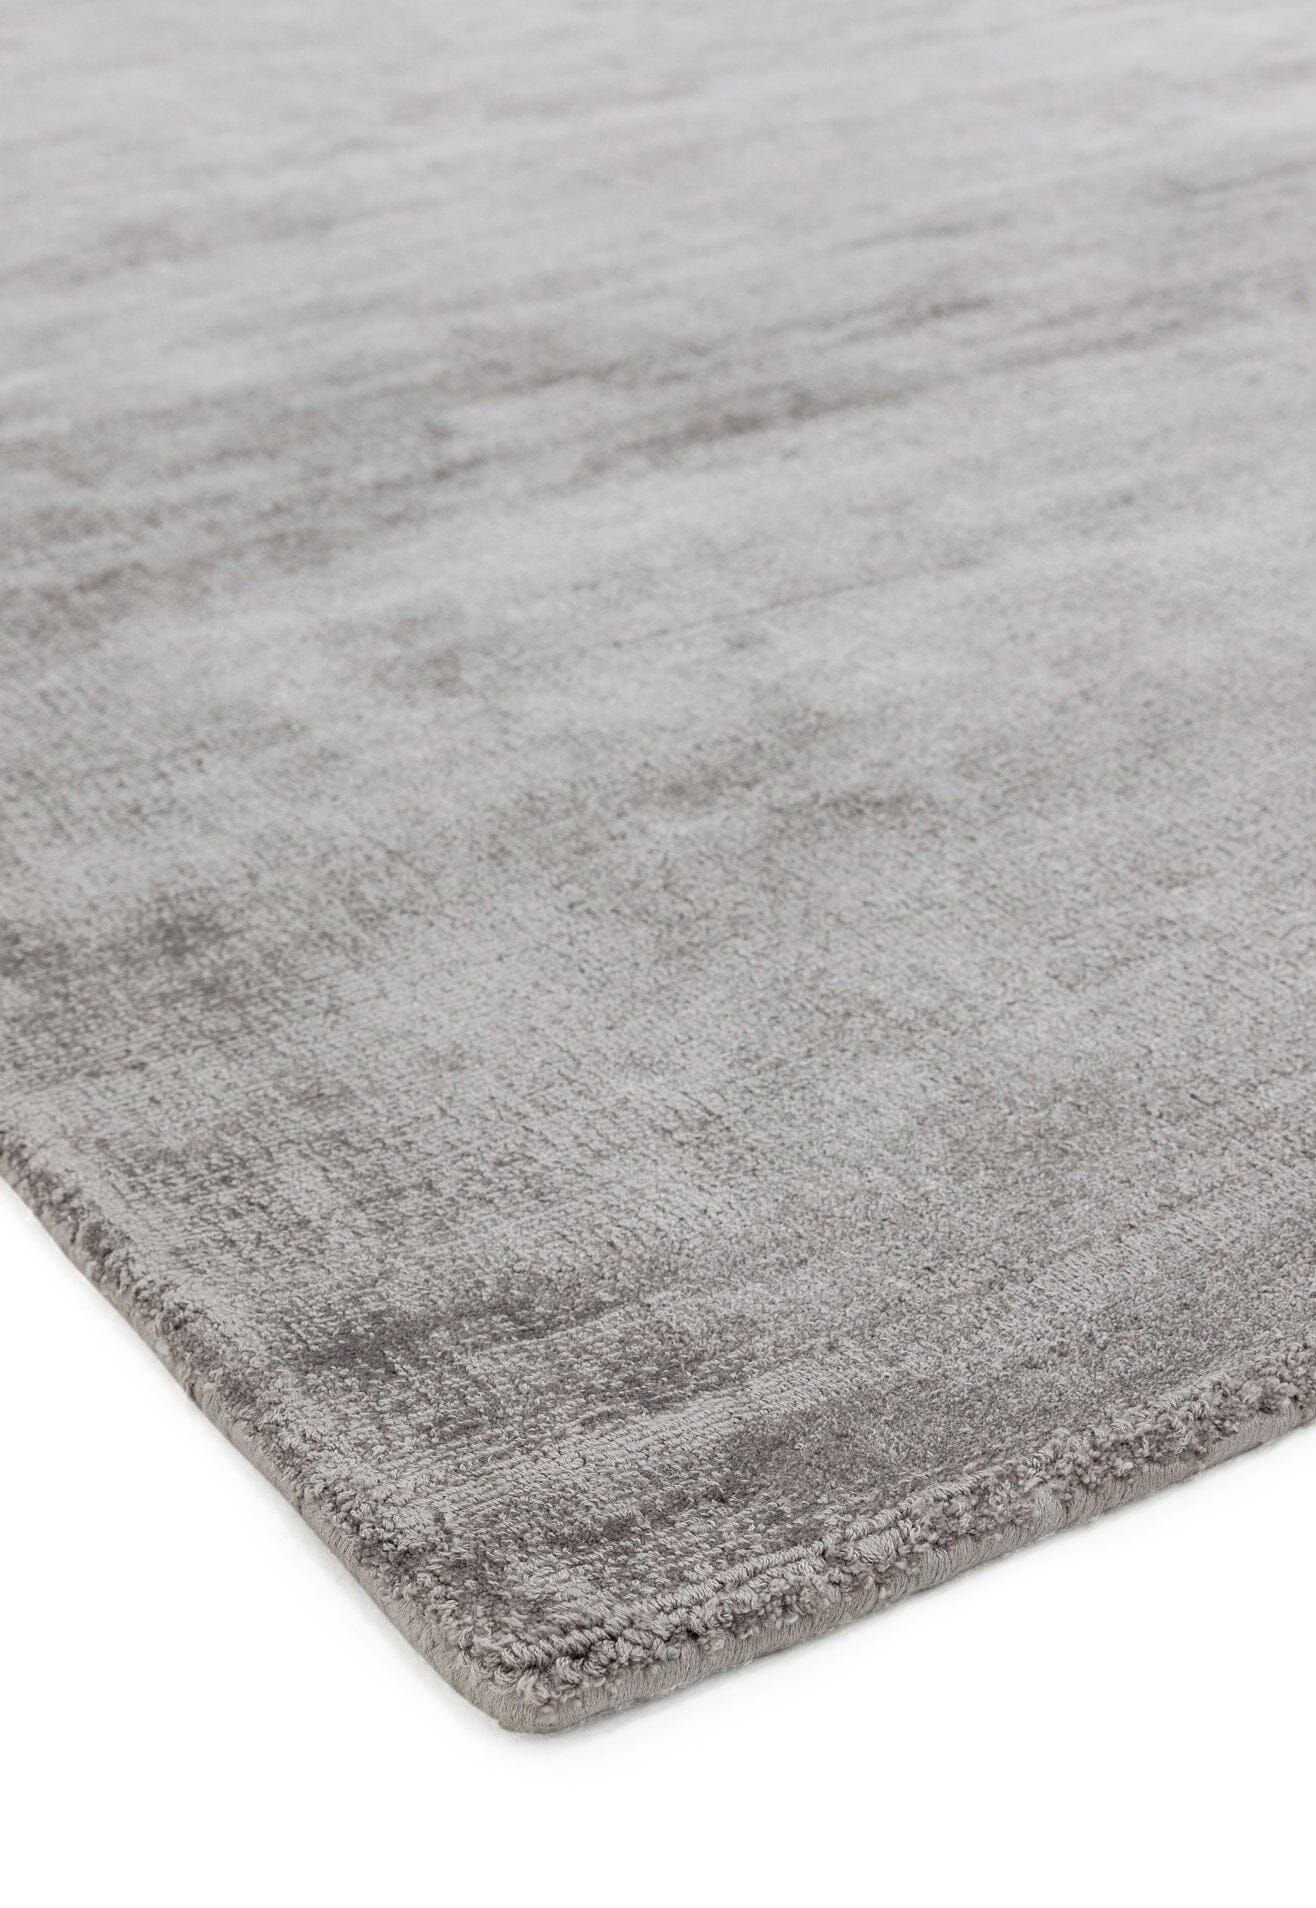 Asiatic Carpets Blade Hand Woven Rug Silver - 120 x 170cm